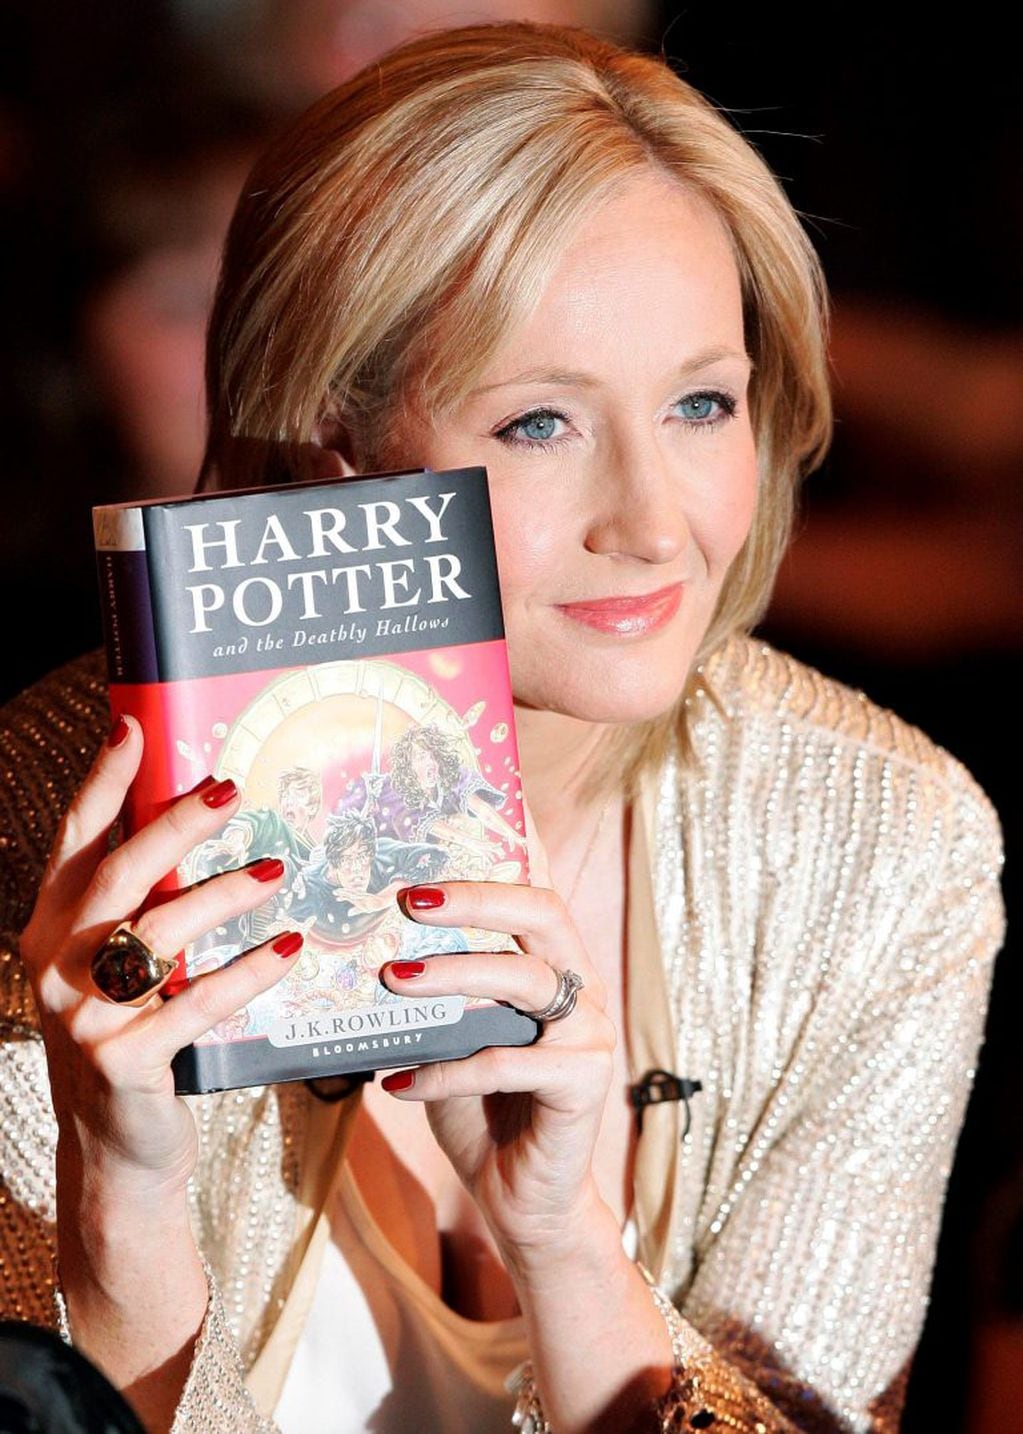 This file photo taken on July 20, 2007 shows British author J.K. Rowling presenting her novel "Harry Potter and the Deathly Hallows" which went on sale at midnight 20 July 2007 at the National History museum in London. 
The creator of a wizarding empire which has dazzled the world, J. K. Rowling struggled through hardship to become an unrivalled children's author with a global voice. Now 20 years since "Harry Potter and the Philosopher's Stone" was first published, inspiring a generation of young readers -- and their parents -- it is hard to imagine Rowling before the seven Harry Potter books.
 / AFP PHOTO / Shaun CURRY londres inglaterra J. K. Rowling aniversario de la primera edicion de Harry Potter y la piedra filosofal de fracaso total a convertirse en una creadora magica escritora autora del libro